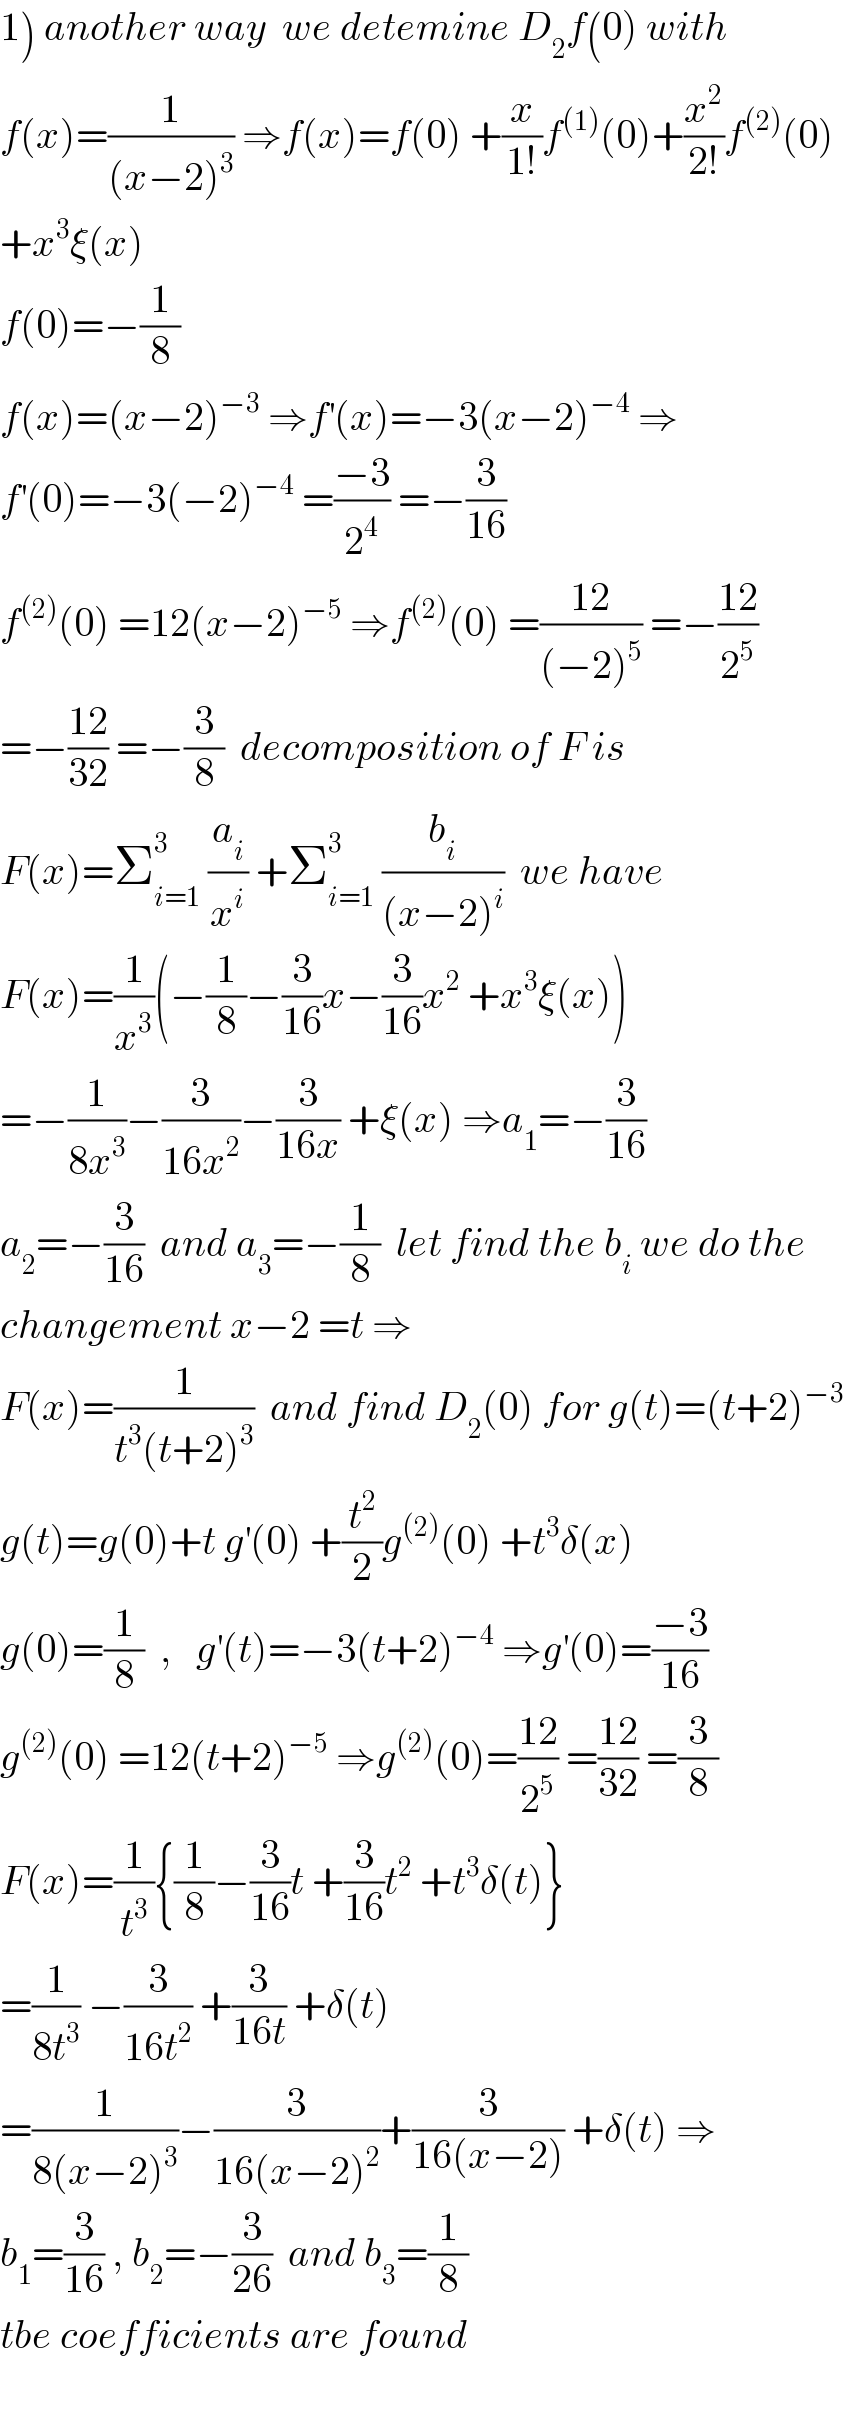 1) another way  we detemine D_2 f(0) with  f(x)=(1/((x−2)^3 )) ⇒f(x)=f(0) +(x/(1!))f^((1)) (0)+(x^2 /(2!))f^((2)) (0)  +x^3 ξ(x)  f(0)=−(1/8)  f(x)=(x−2)^(−3)  ⇒f^′ (x)=−3(x−2)^(−4)  ⇒  f^′ (0)=−3(−2)^(−4)  =((−3)/2^4 ) =−(3/(16))  f^((2)) (0) =12(x−2)^(−5)  ⇒f^((2)) (0) =((12)/((−2)^5 )) =−((12)/2^5 )  =−((12)/(32)) =−(3/8)  decomposition of F is  F(x)=Σ_(i=1) ^3  (a_i /x^i ) +Σ_(i=1) ^3  (b_i /((x−2)^i ))  we have  F(x)=(1/x^3 )(−(1/8)−(3/(16))x−(3/(16))x^2  +x^3 ξ(x))  =−(1/(8x^3 ))−(3/(16x^2 ))−(3/(16x)) +ξ(x) ⇒a_1 =−(3/(16))  a_2 =−(3/(16))  and a_3 =−(1/8)  let find the b_i  we do the  changement x−2 =t ⇒  F(x)=(1/(t^3 (t+2)^3 ))  and find D_2 (0) for g(t)=(t+2)^(−3)   g(t)=g(0)+t g^′ (0) +(t^2 /2)g^((2)) (0) +t^3 δ(x)  g(0)=(1/8)  ,   g^′ (t)=−3(t+2)^(−4)  ⇒g^′ (0)=((−3)/(16))  g^((2)) (0) =12(t+2)^(−5)  ⇒g^((2)) (0)=((12)/2^5 ) =((12)/(32)) =(3/8)  F(x)=(1/t^3 ){(1/8)−(3/(16))t +(3/(16))t^2  +t^3 δ(t)}  =(1/(8t^3 )) −(3/(16t^2 )) +(3/(16t)) +δ(t)  =(1/(8(x−2)^3 ))−(3/(16(x−2)^2 ))+(3/(16(x−2))) +δ(t) ⇒  b_1 =(3/(16)) , b_2 =−(3/(26))  and b_3 =(1/8)  tbe coefficients are found    